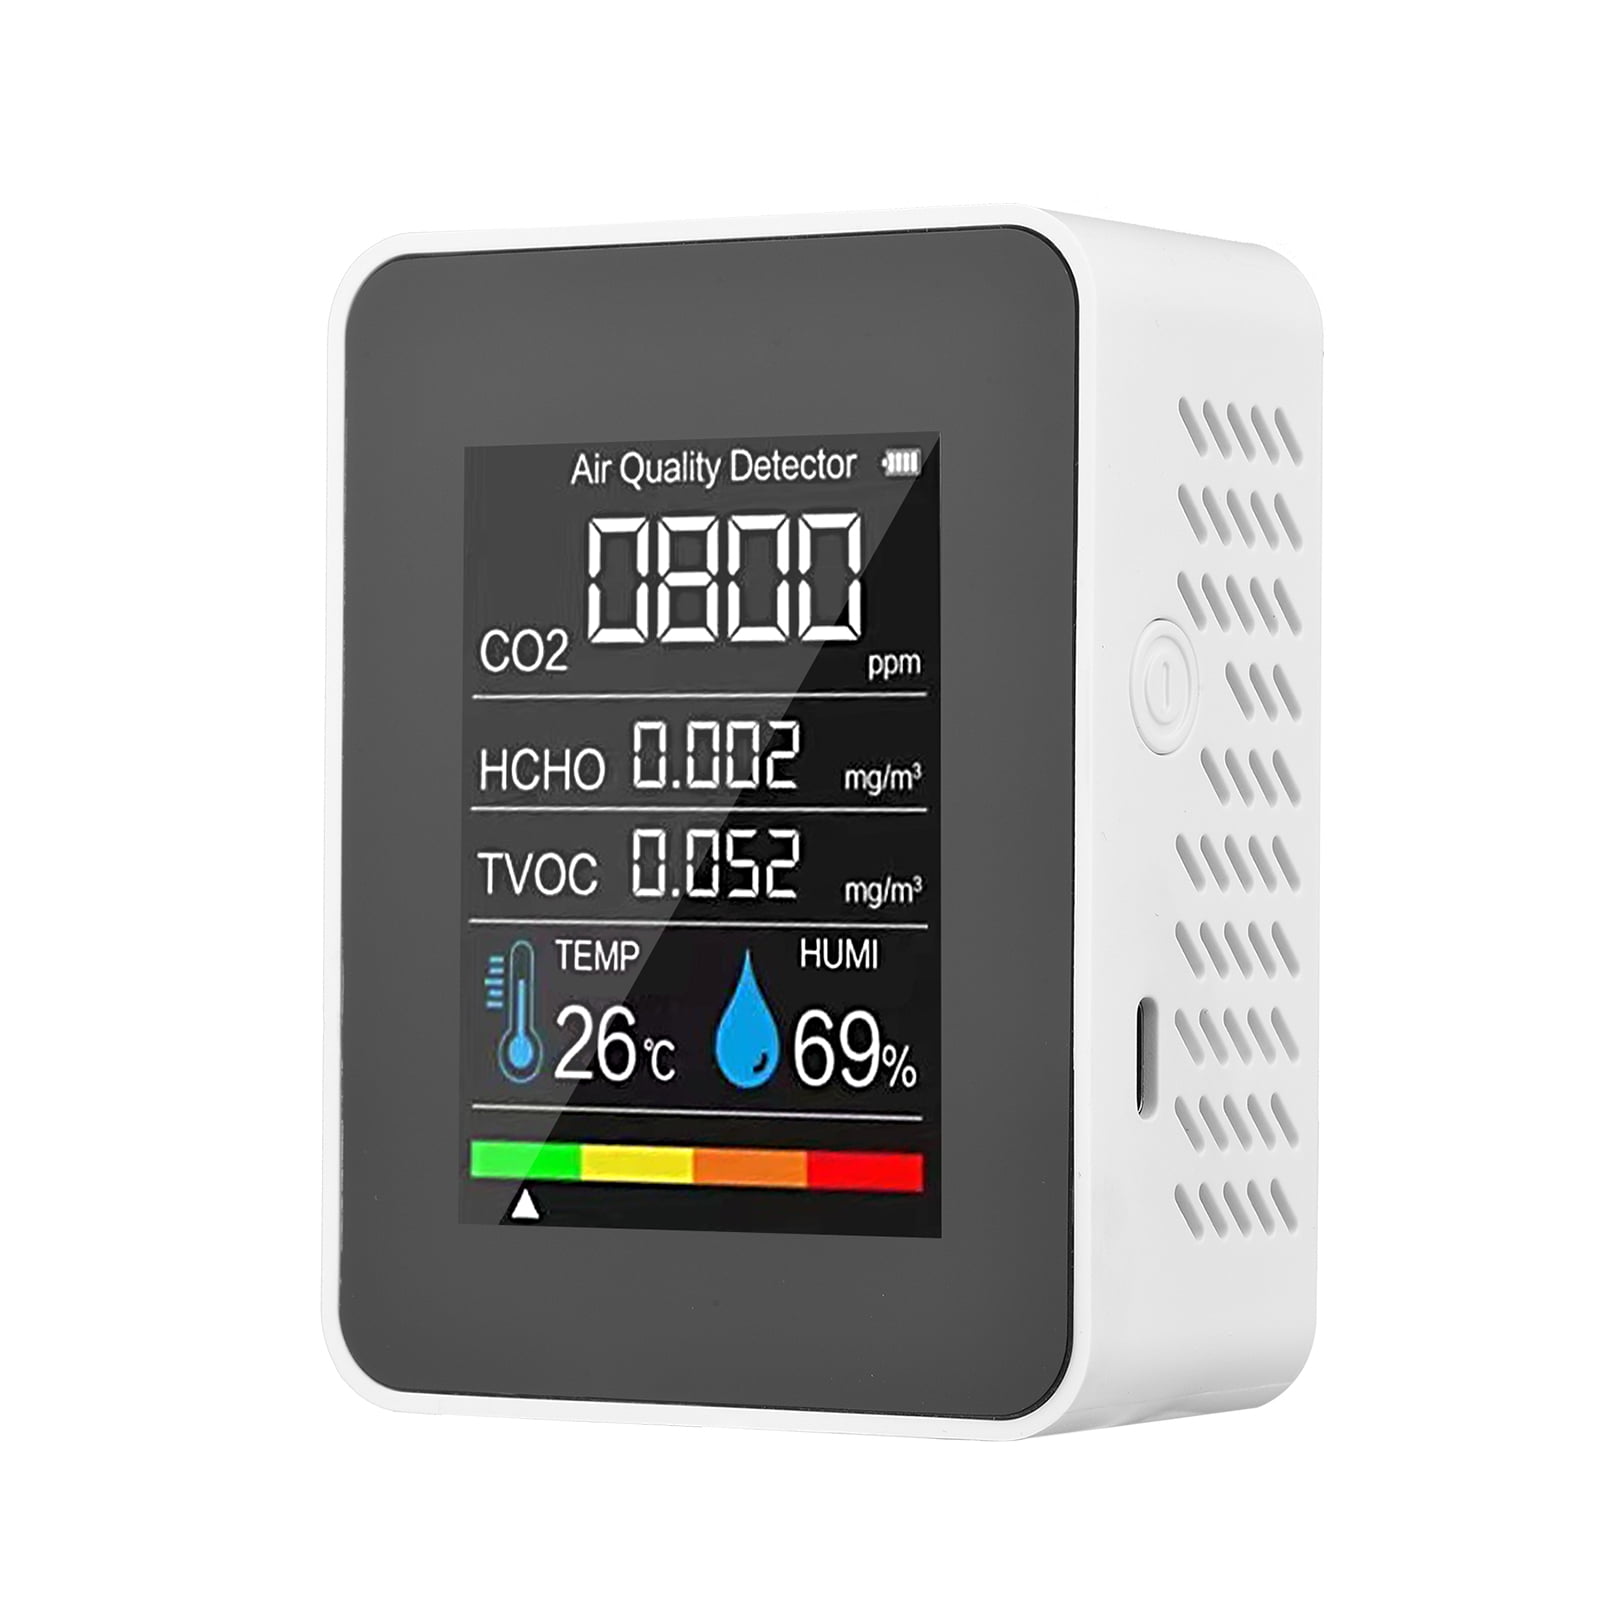 Indoor CO2 Detector Air Quality Monitor PM2.5 PM10 Formaldehyde HCHO TVOC CO2 LCD Digital Detector